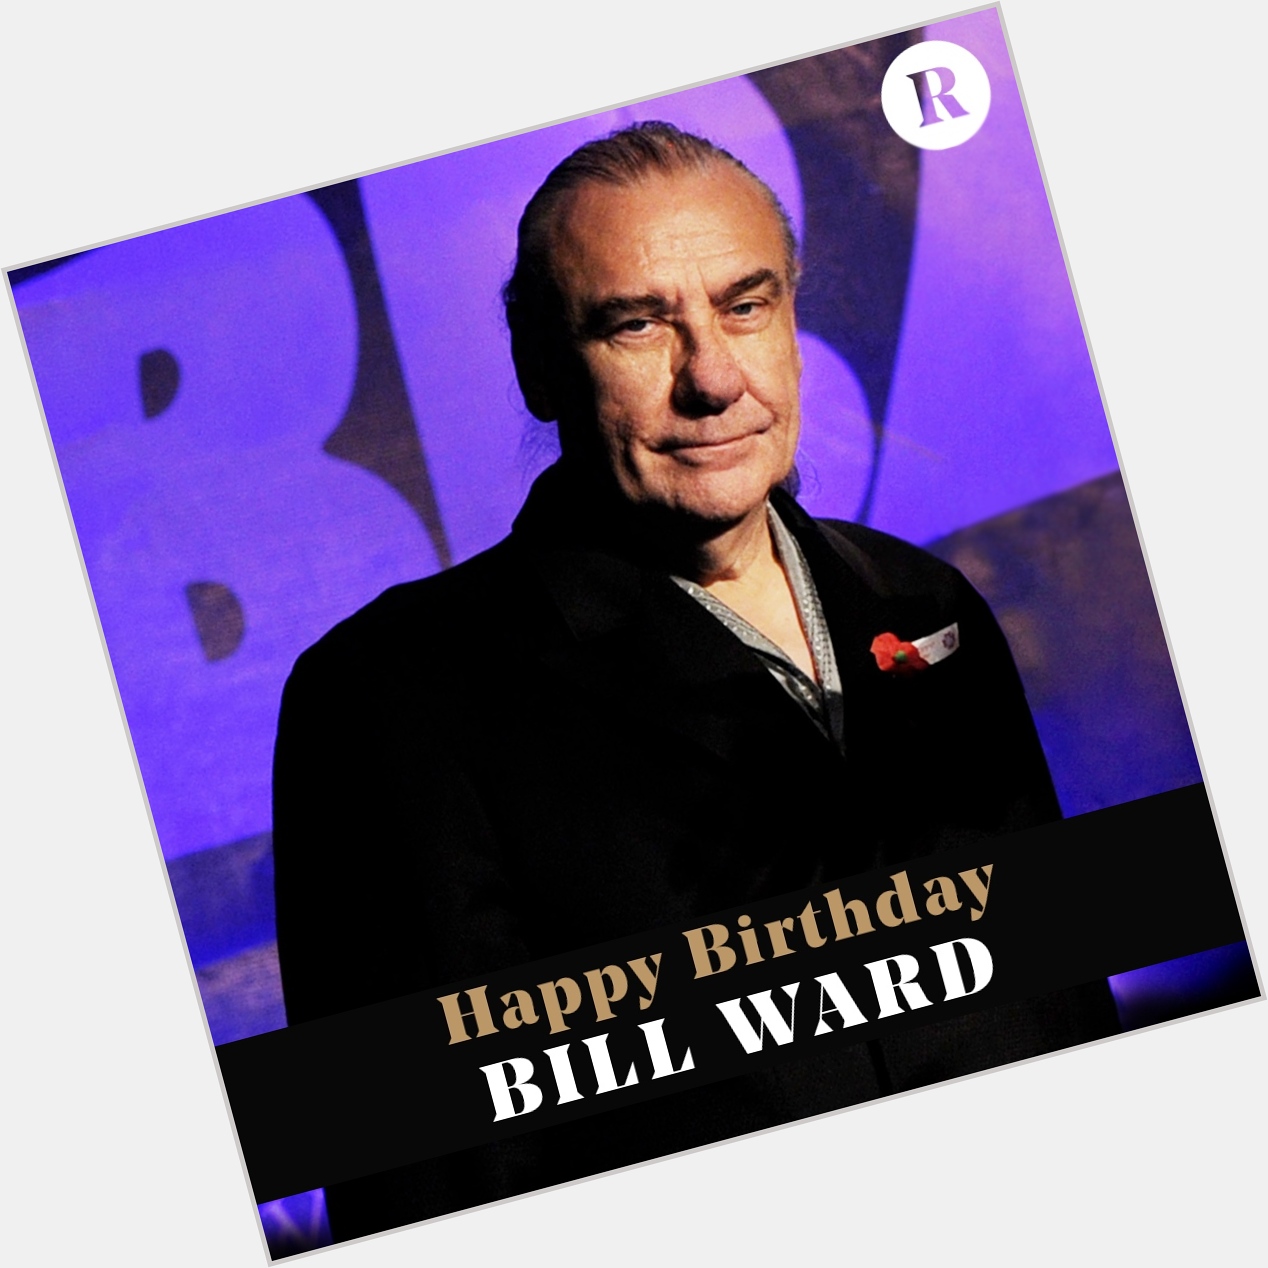  Happy birthday, Bill Ward! When was the first time you heard  :  